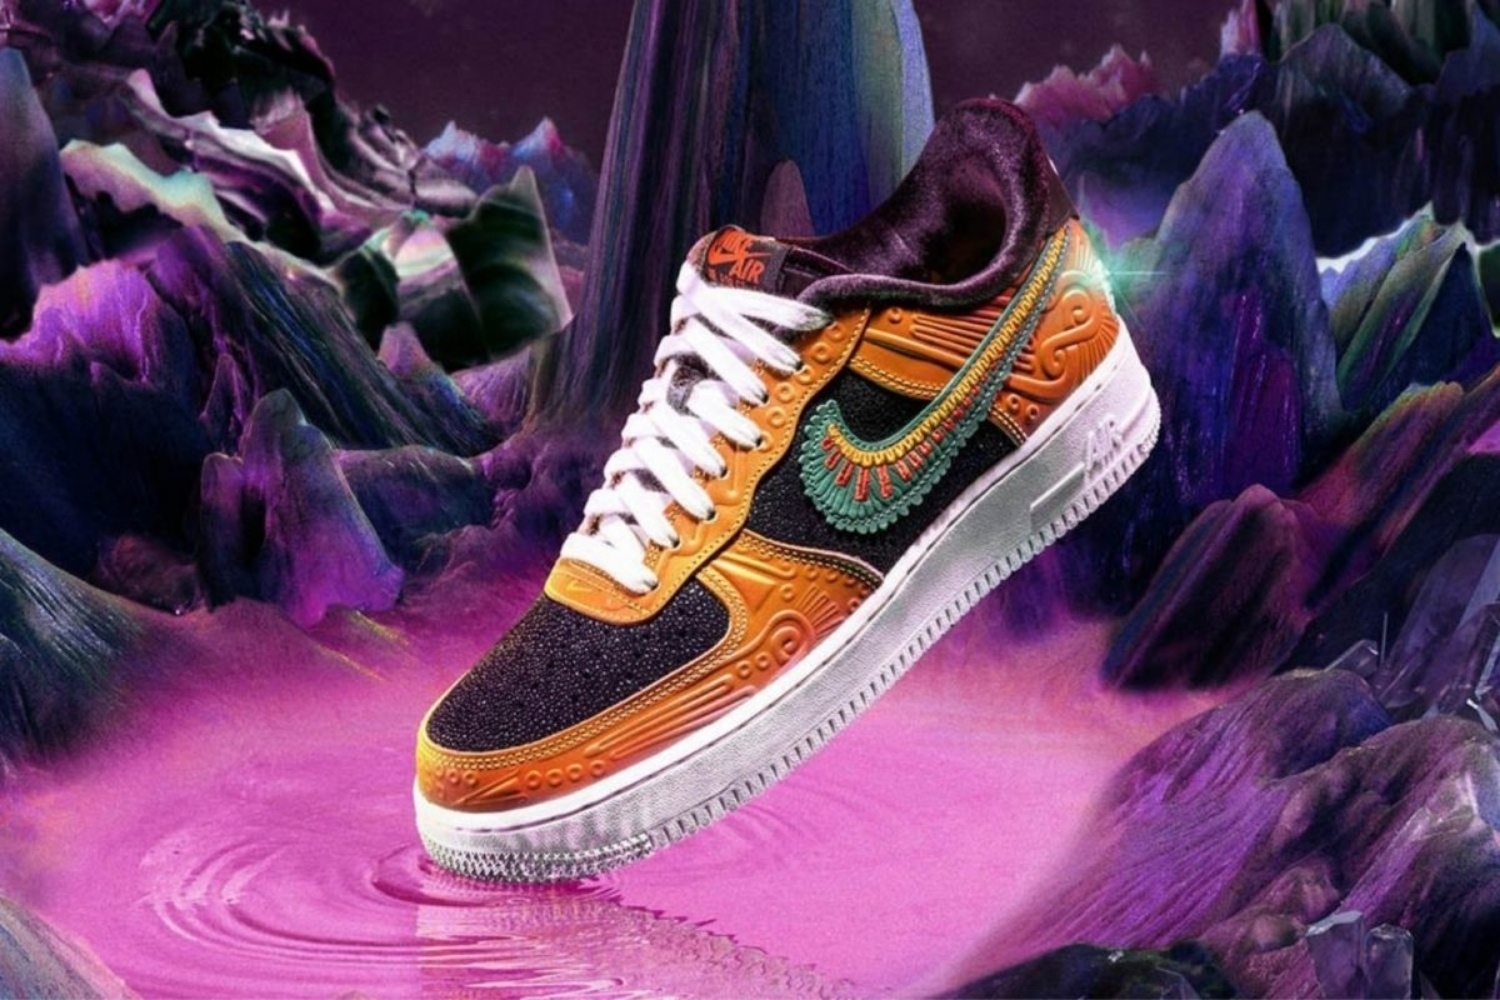 Check out the Nike 'Dìa de Los Muertos 2021' collection here